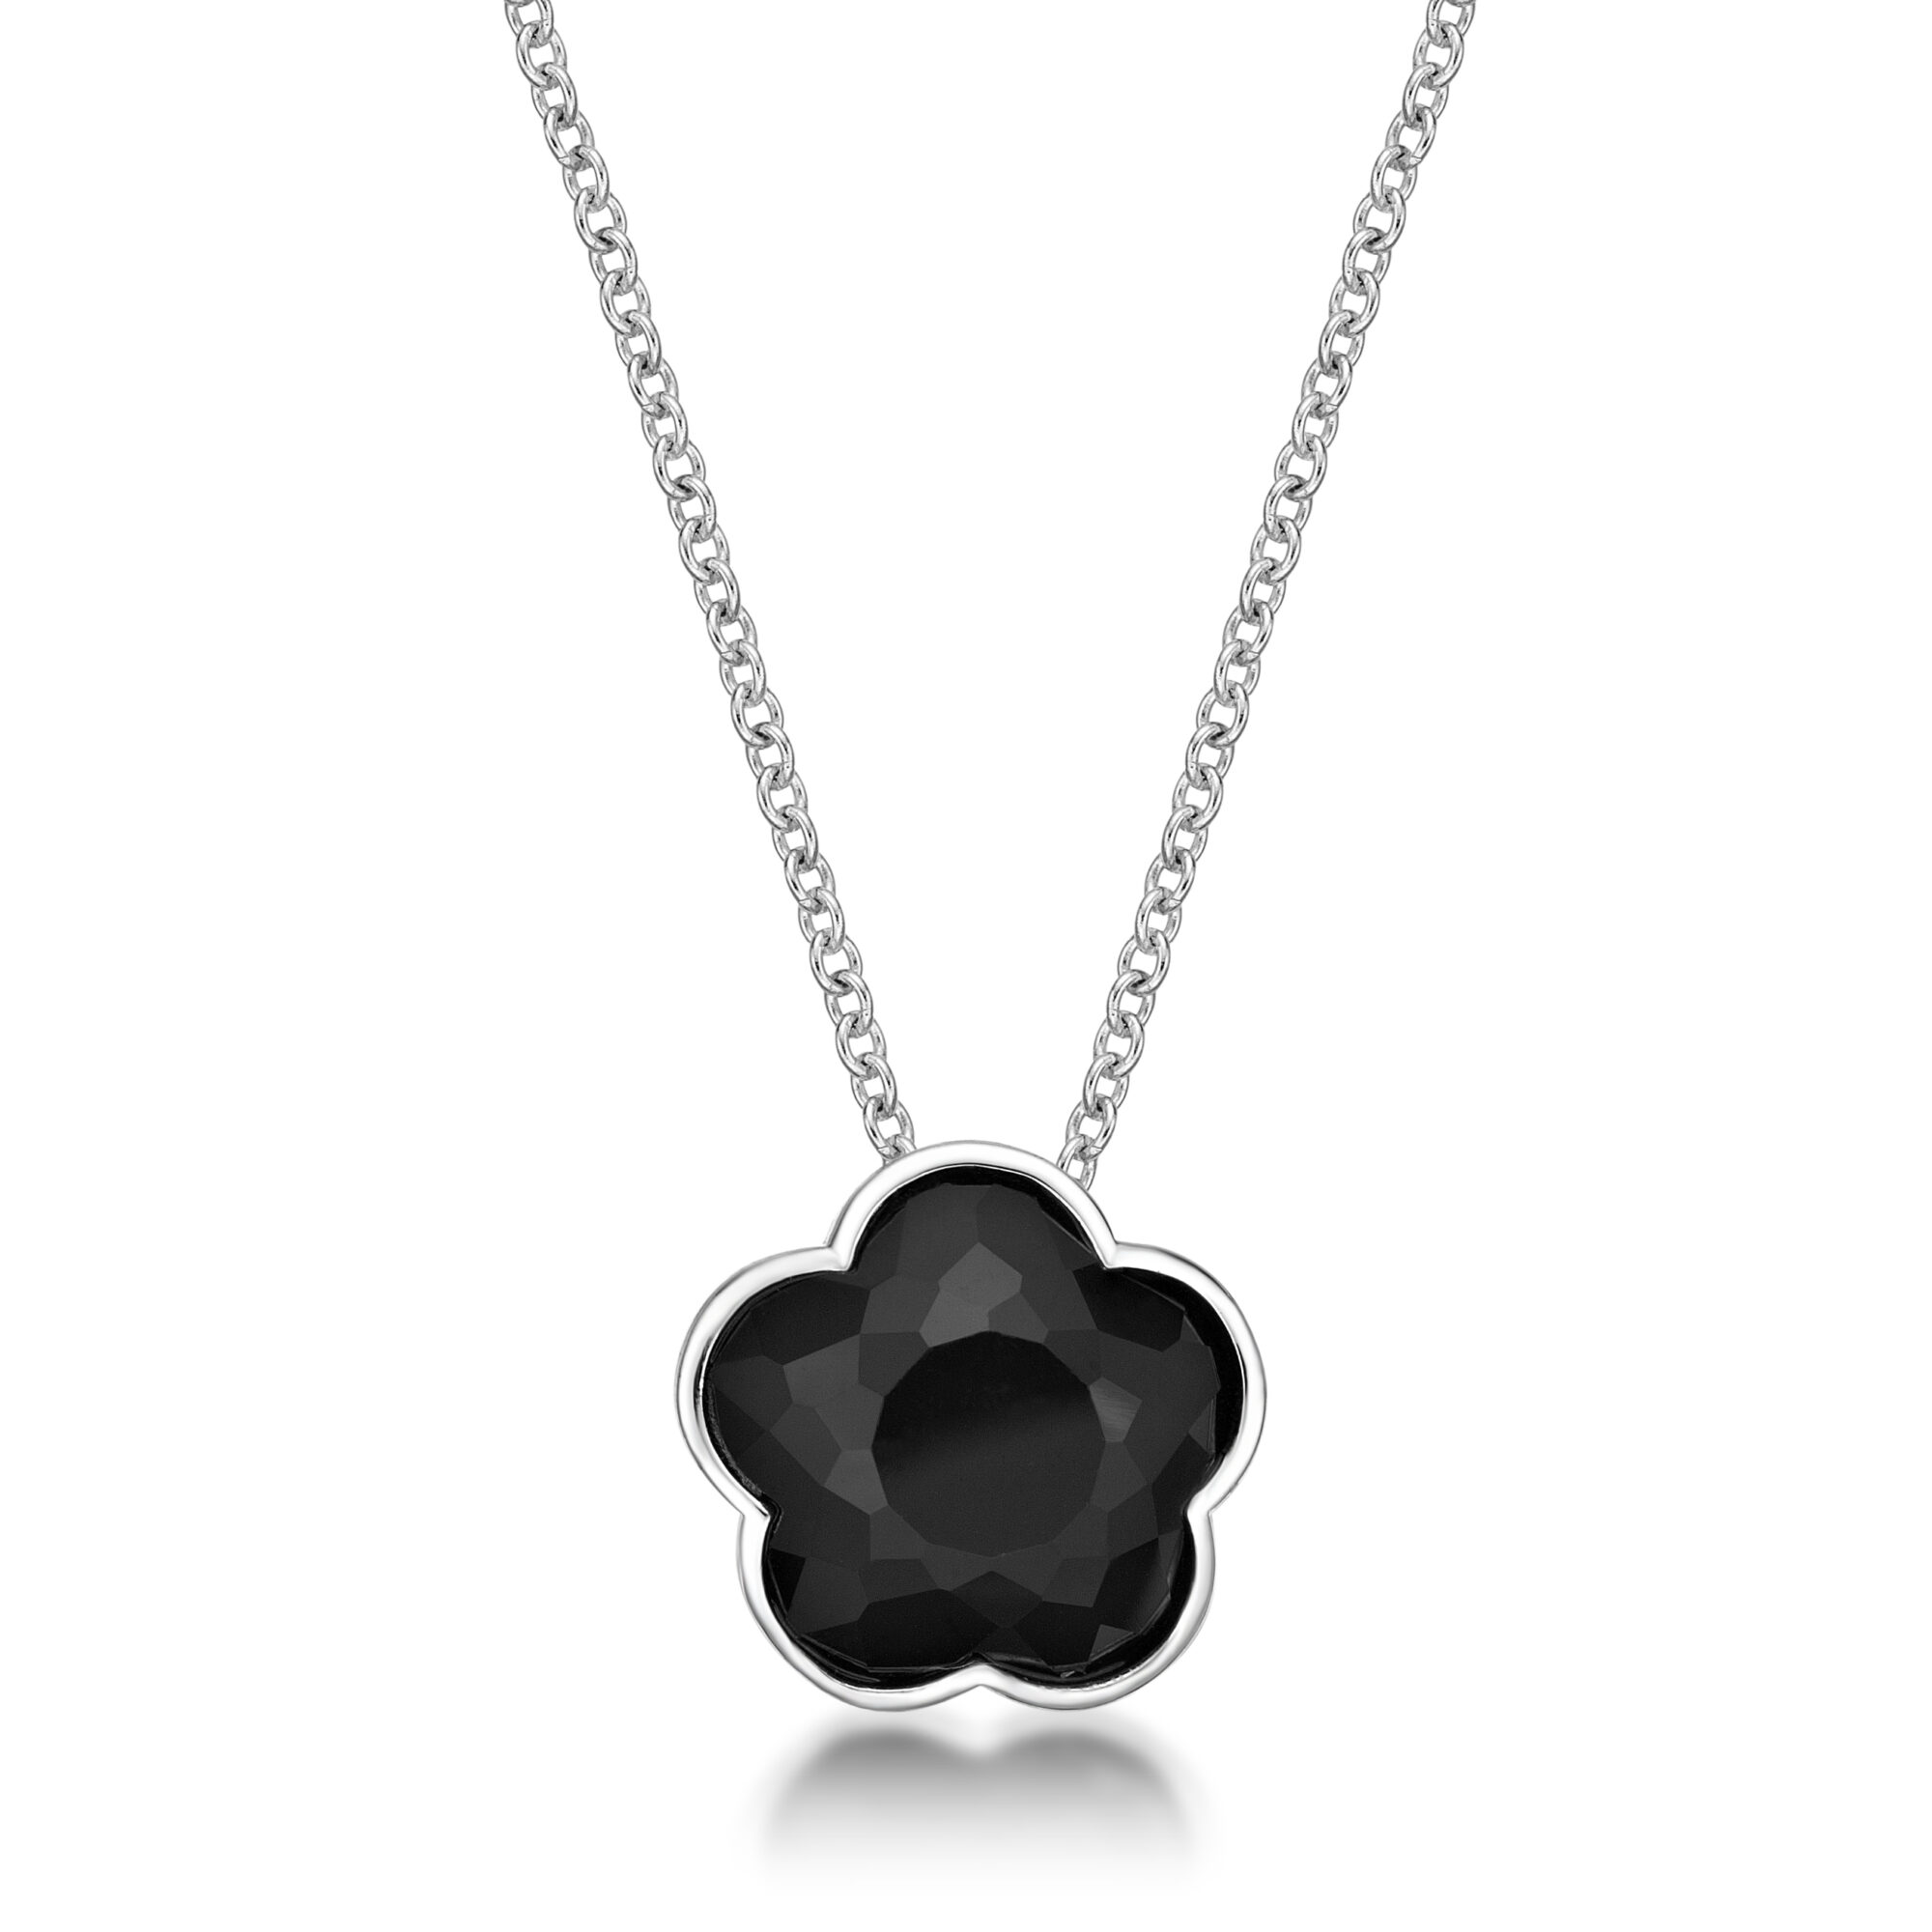 Lavari Jewelers Women’s Black Onyx Five Petal Flower Pendant Necklace with Spring Ring, 925 Sterling Silver, Cubic Zirconia, 18 Inch Chain